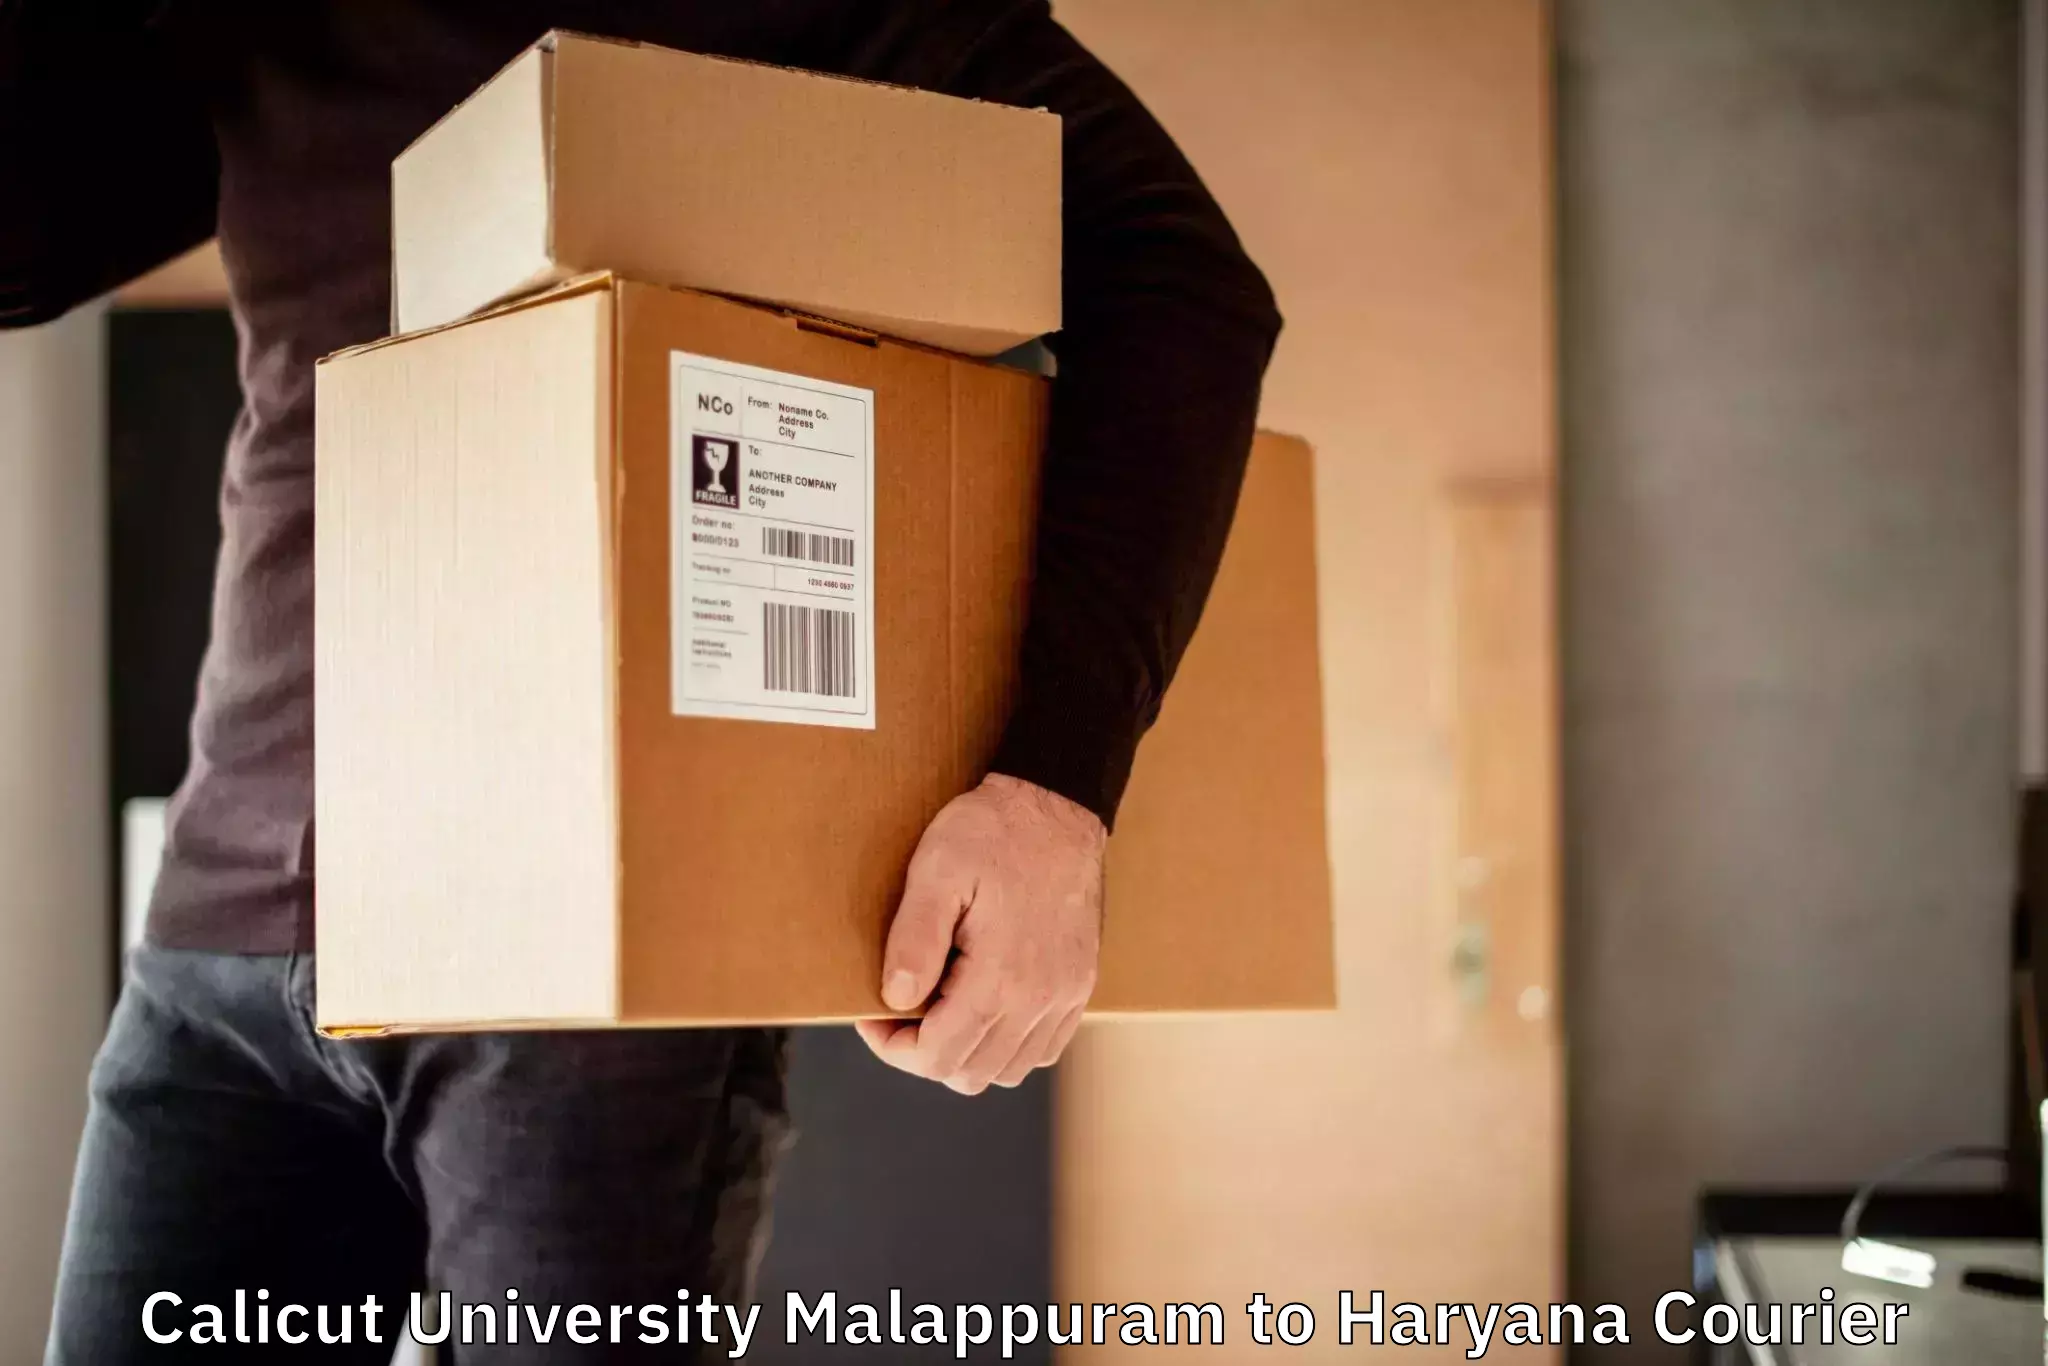 Specialized courier services Calicut University Malappuram to Faridabad